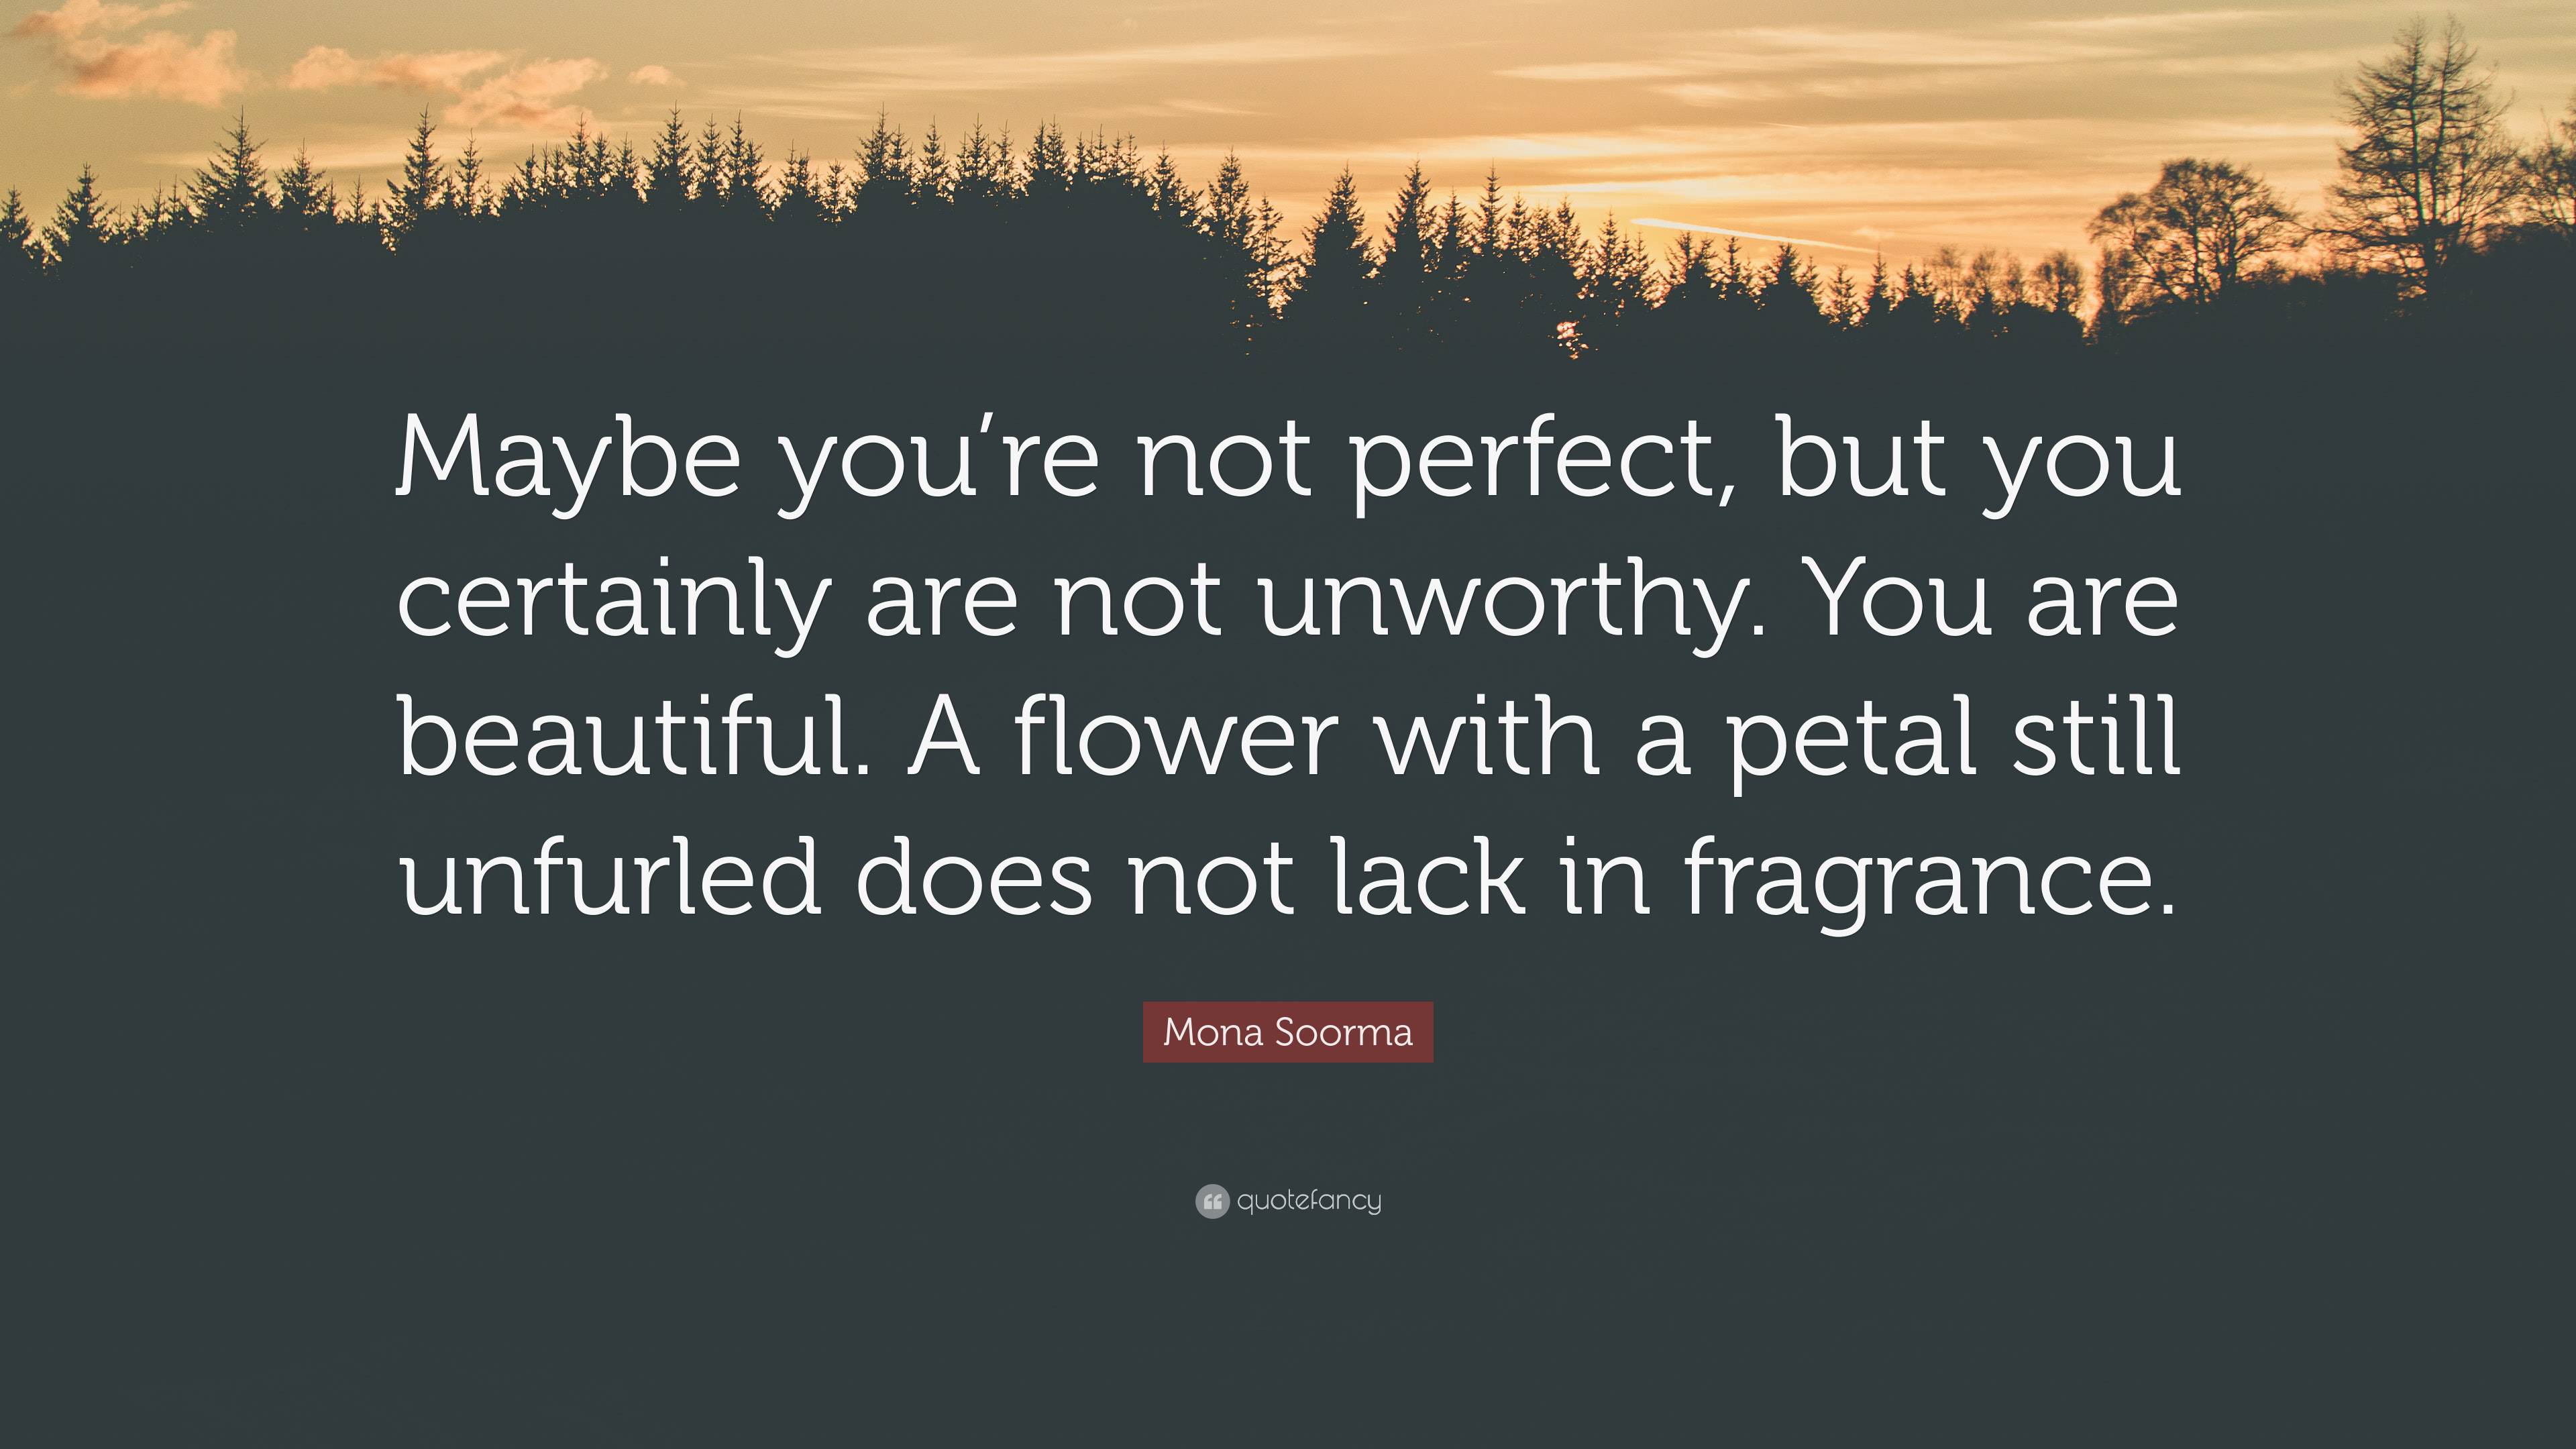 Mona Soorma Quote: “Maybe you're not perfect, but you certainly are not  unworthy. You are beautiful. A flower with a petal still unfurled do”